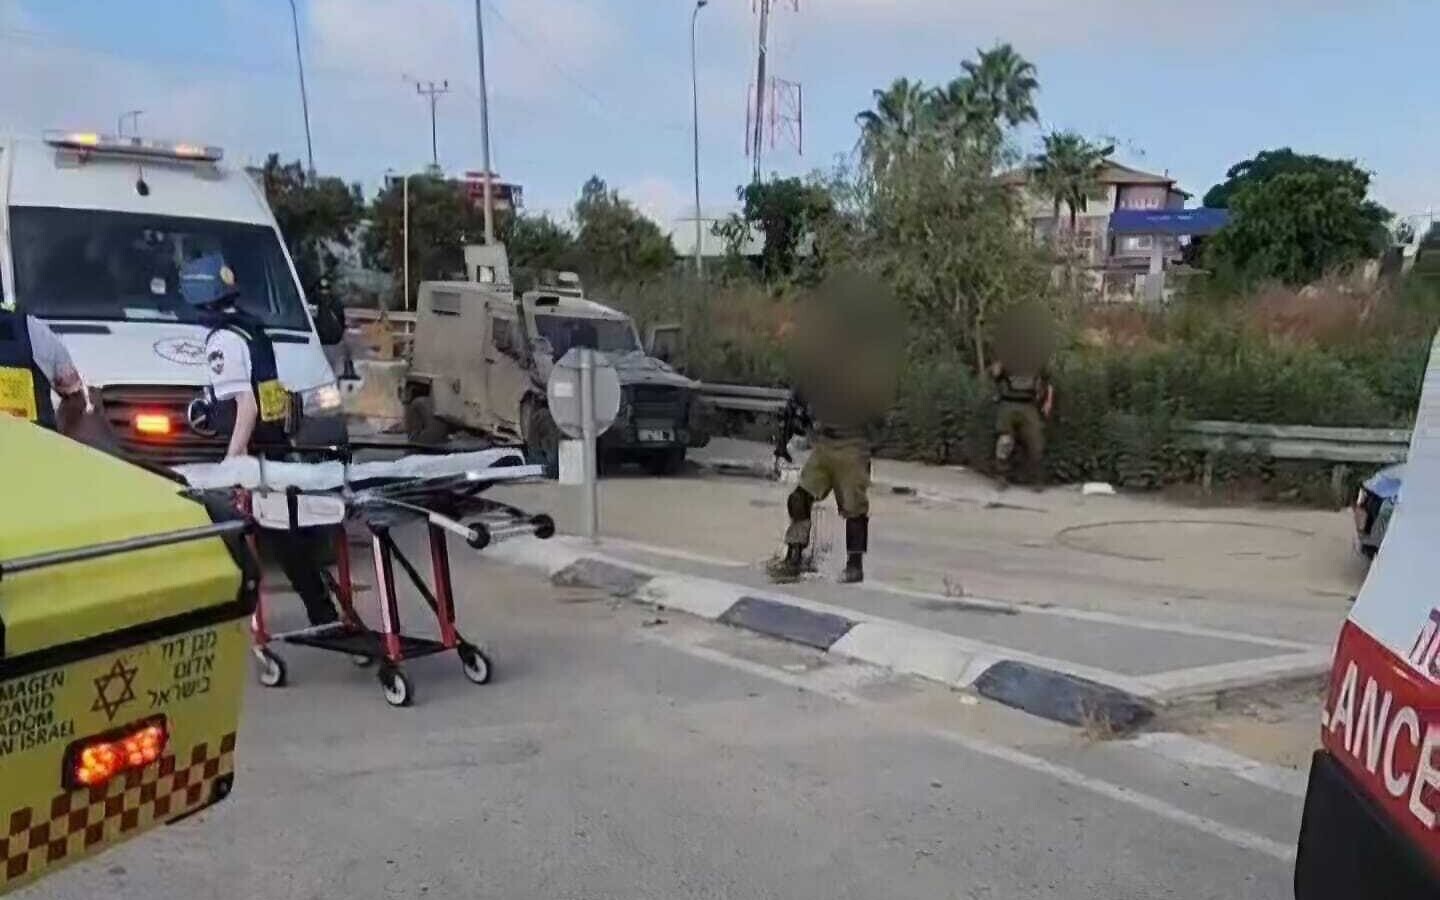 Two IDF soldiers wounded in West Bank drive-by shooting attack